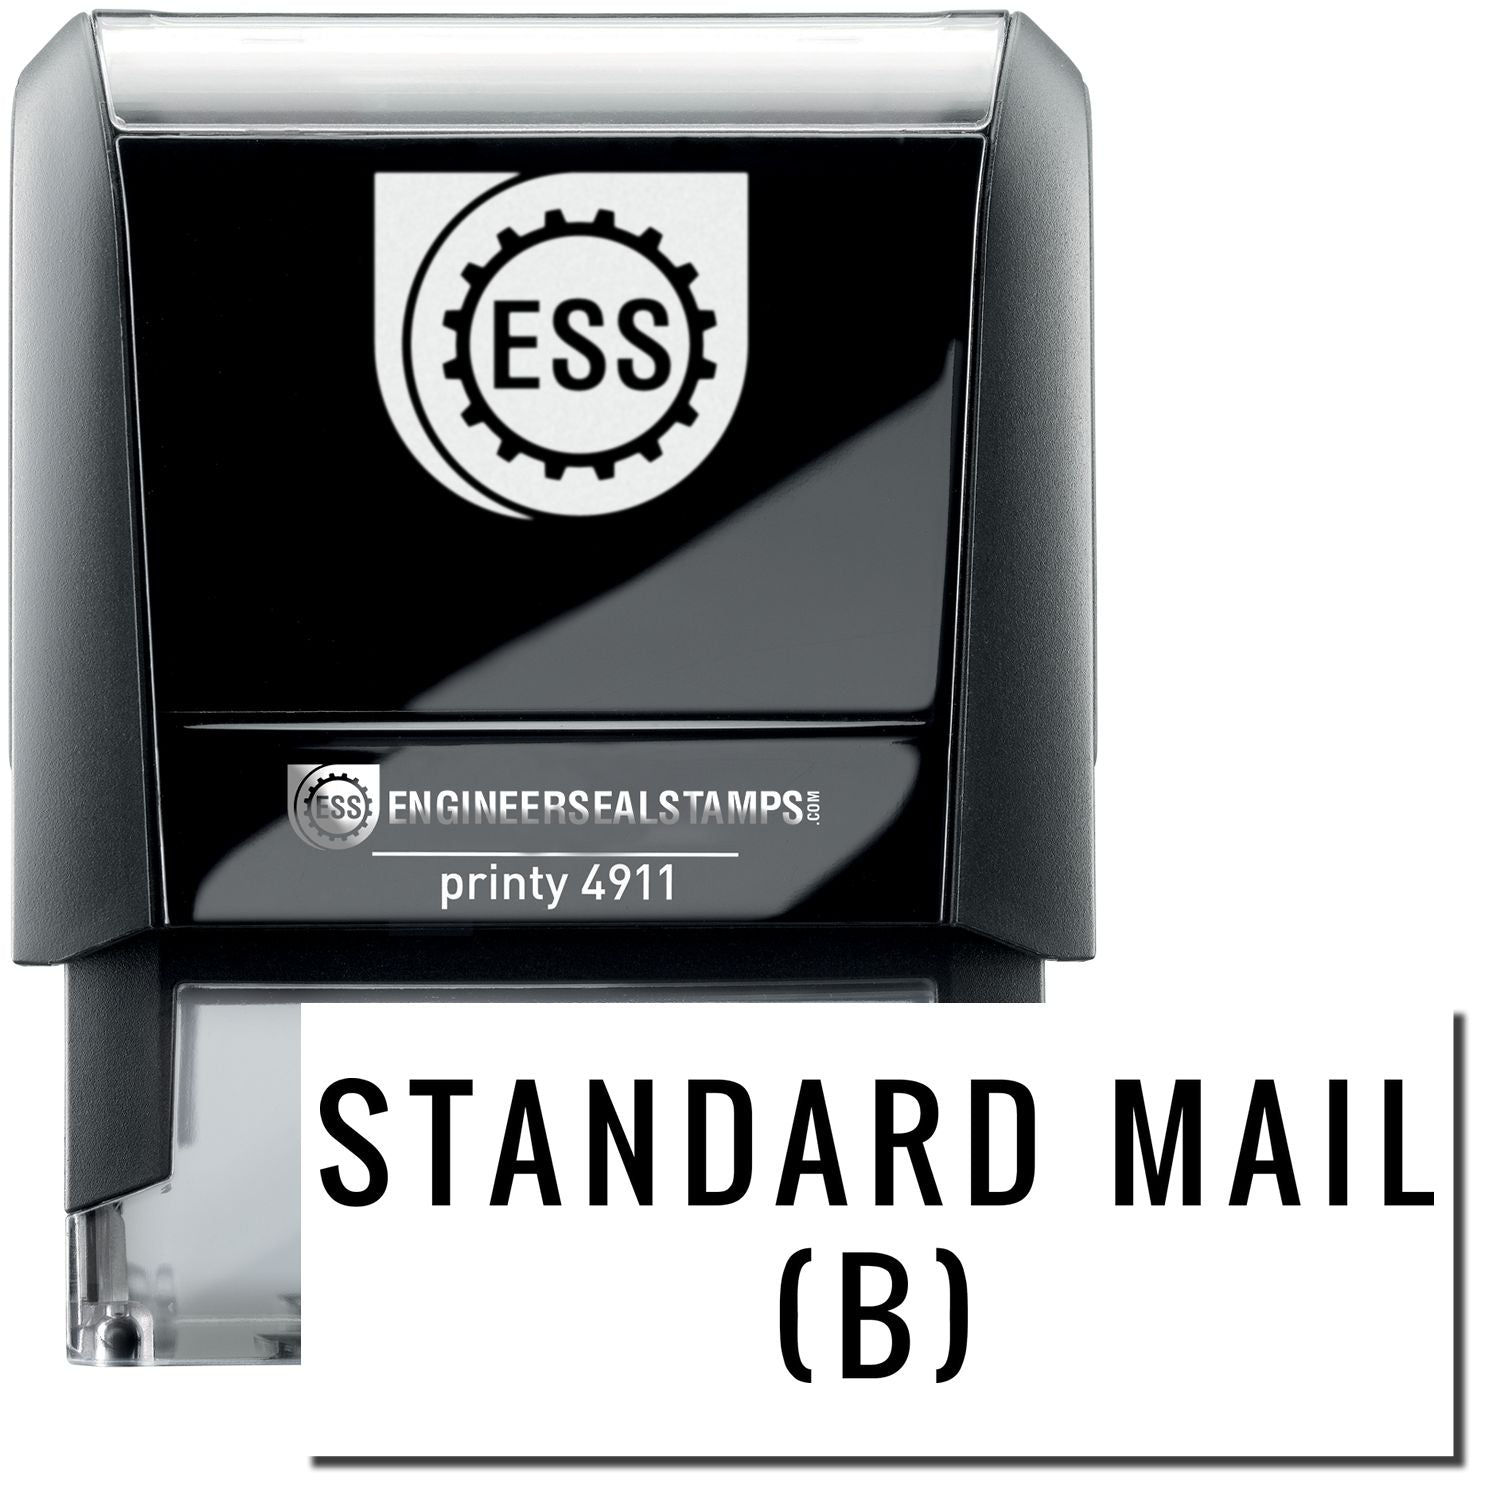 A self-inking stamp with a stamped image showing how the text "STANDARD MAIL (B)" is displayed after stamping.